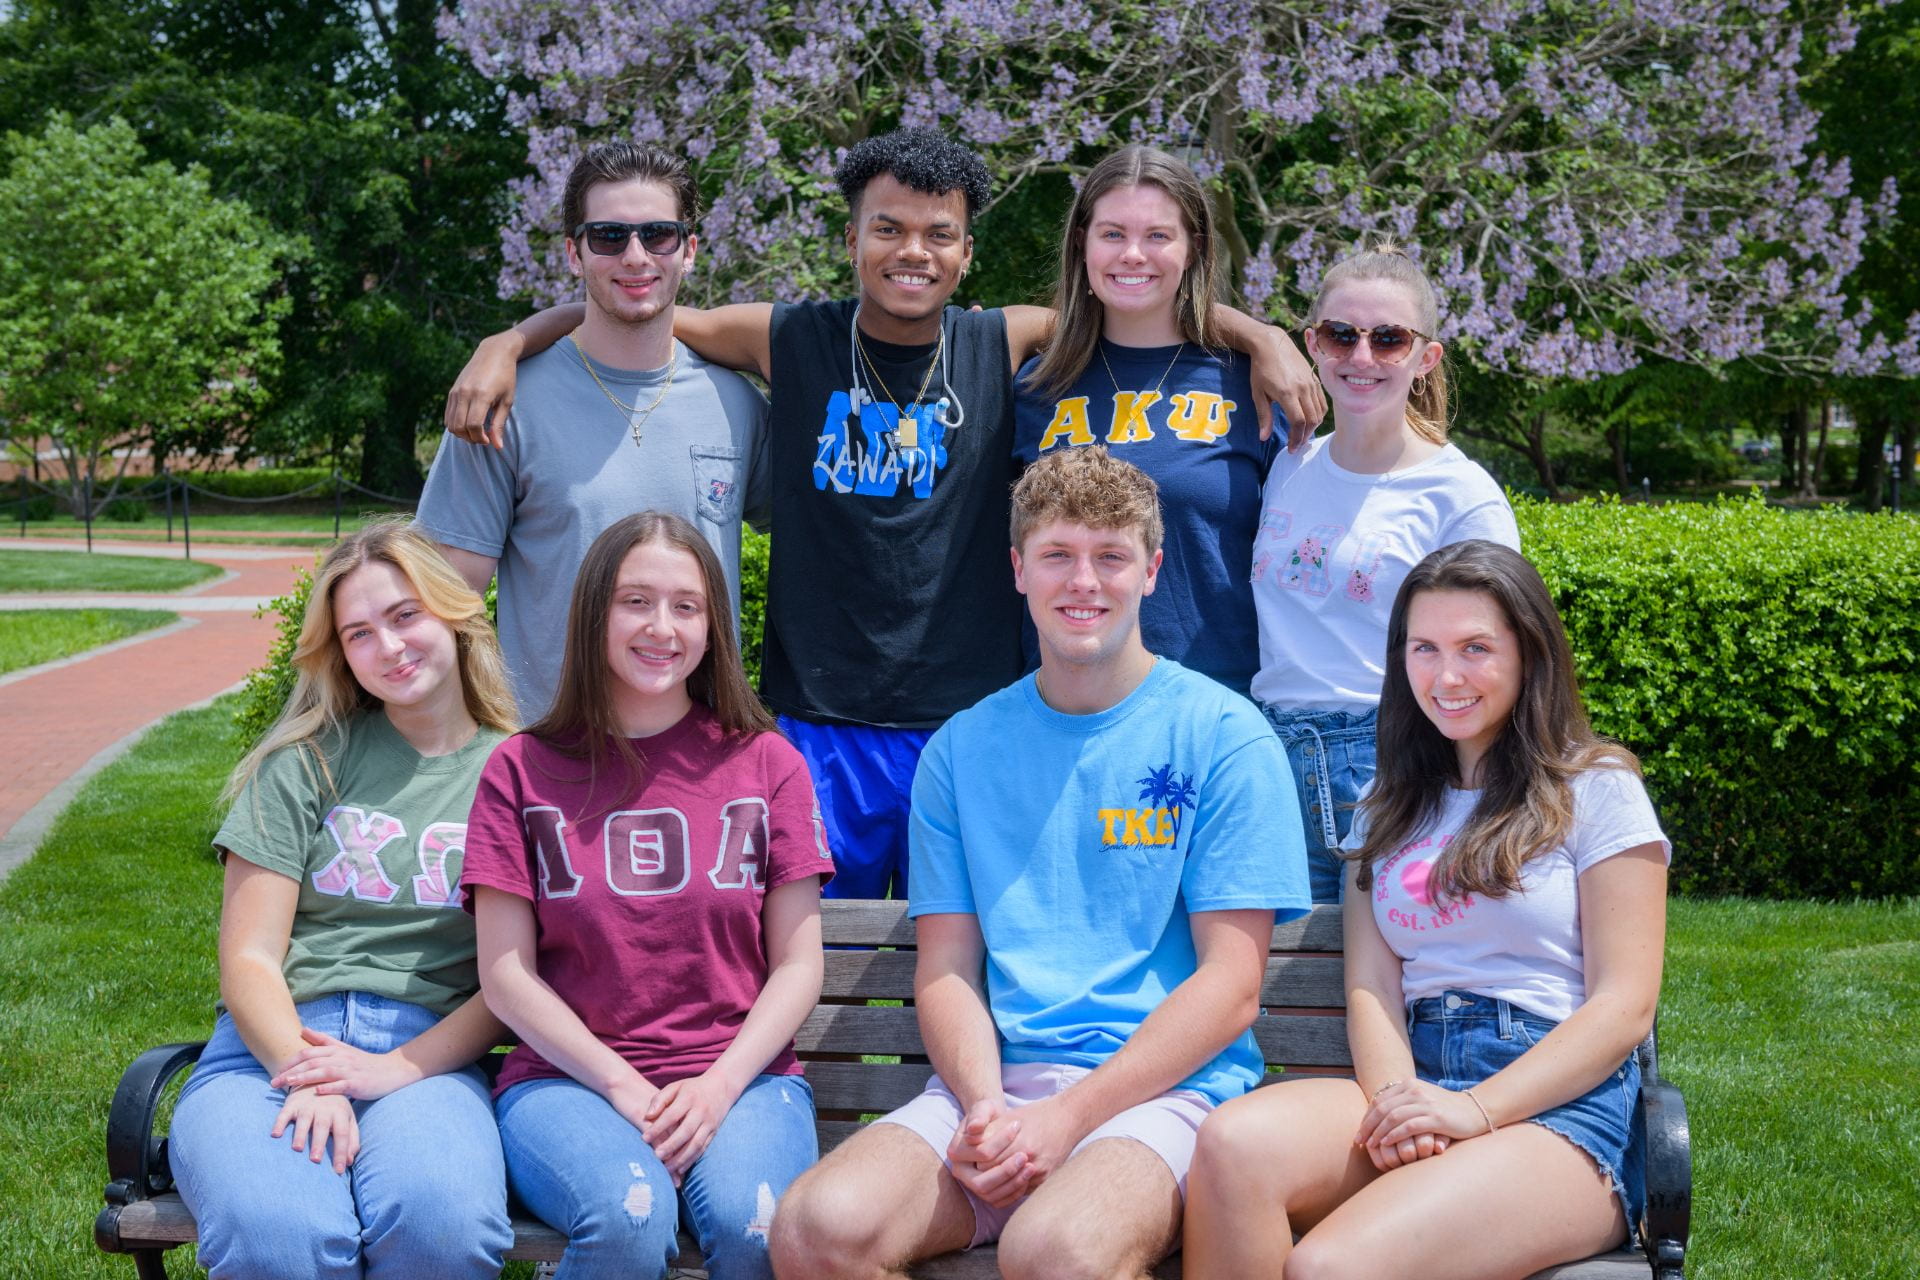 Students wearing fraternity and sorority letter shirts pose for a group photo